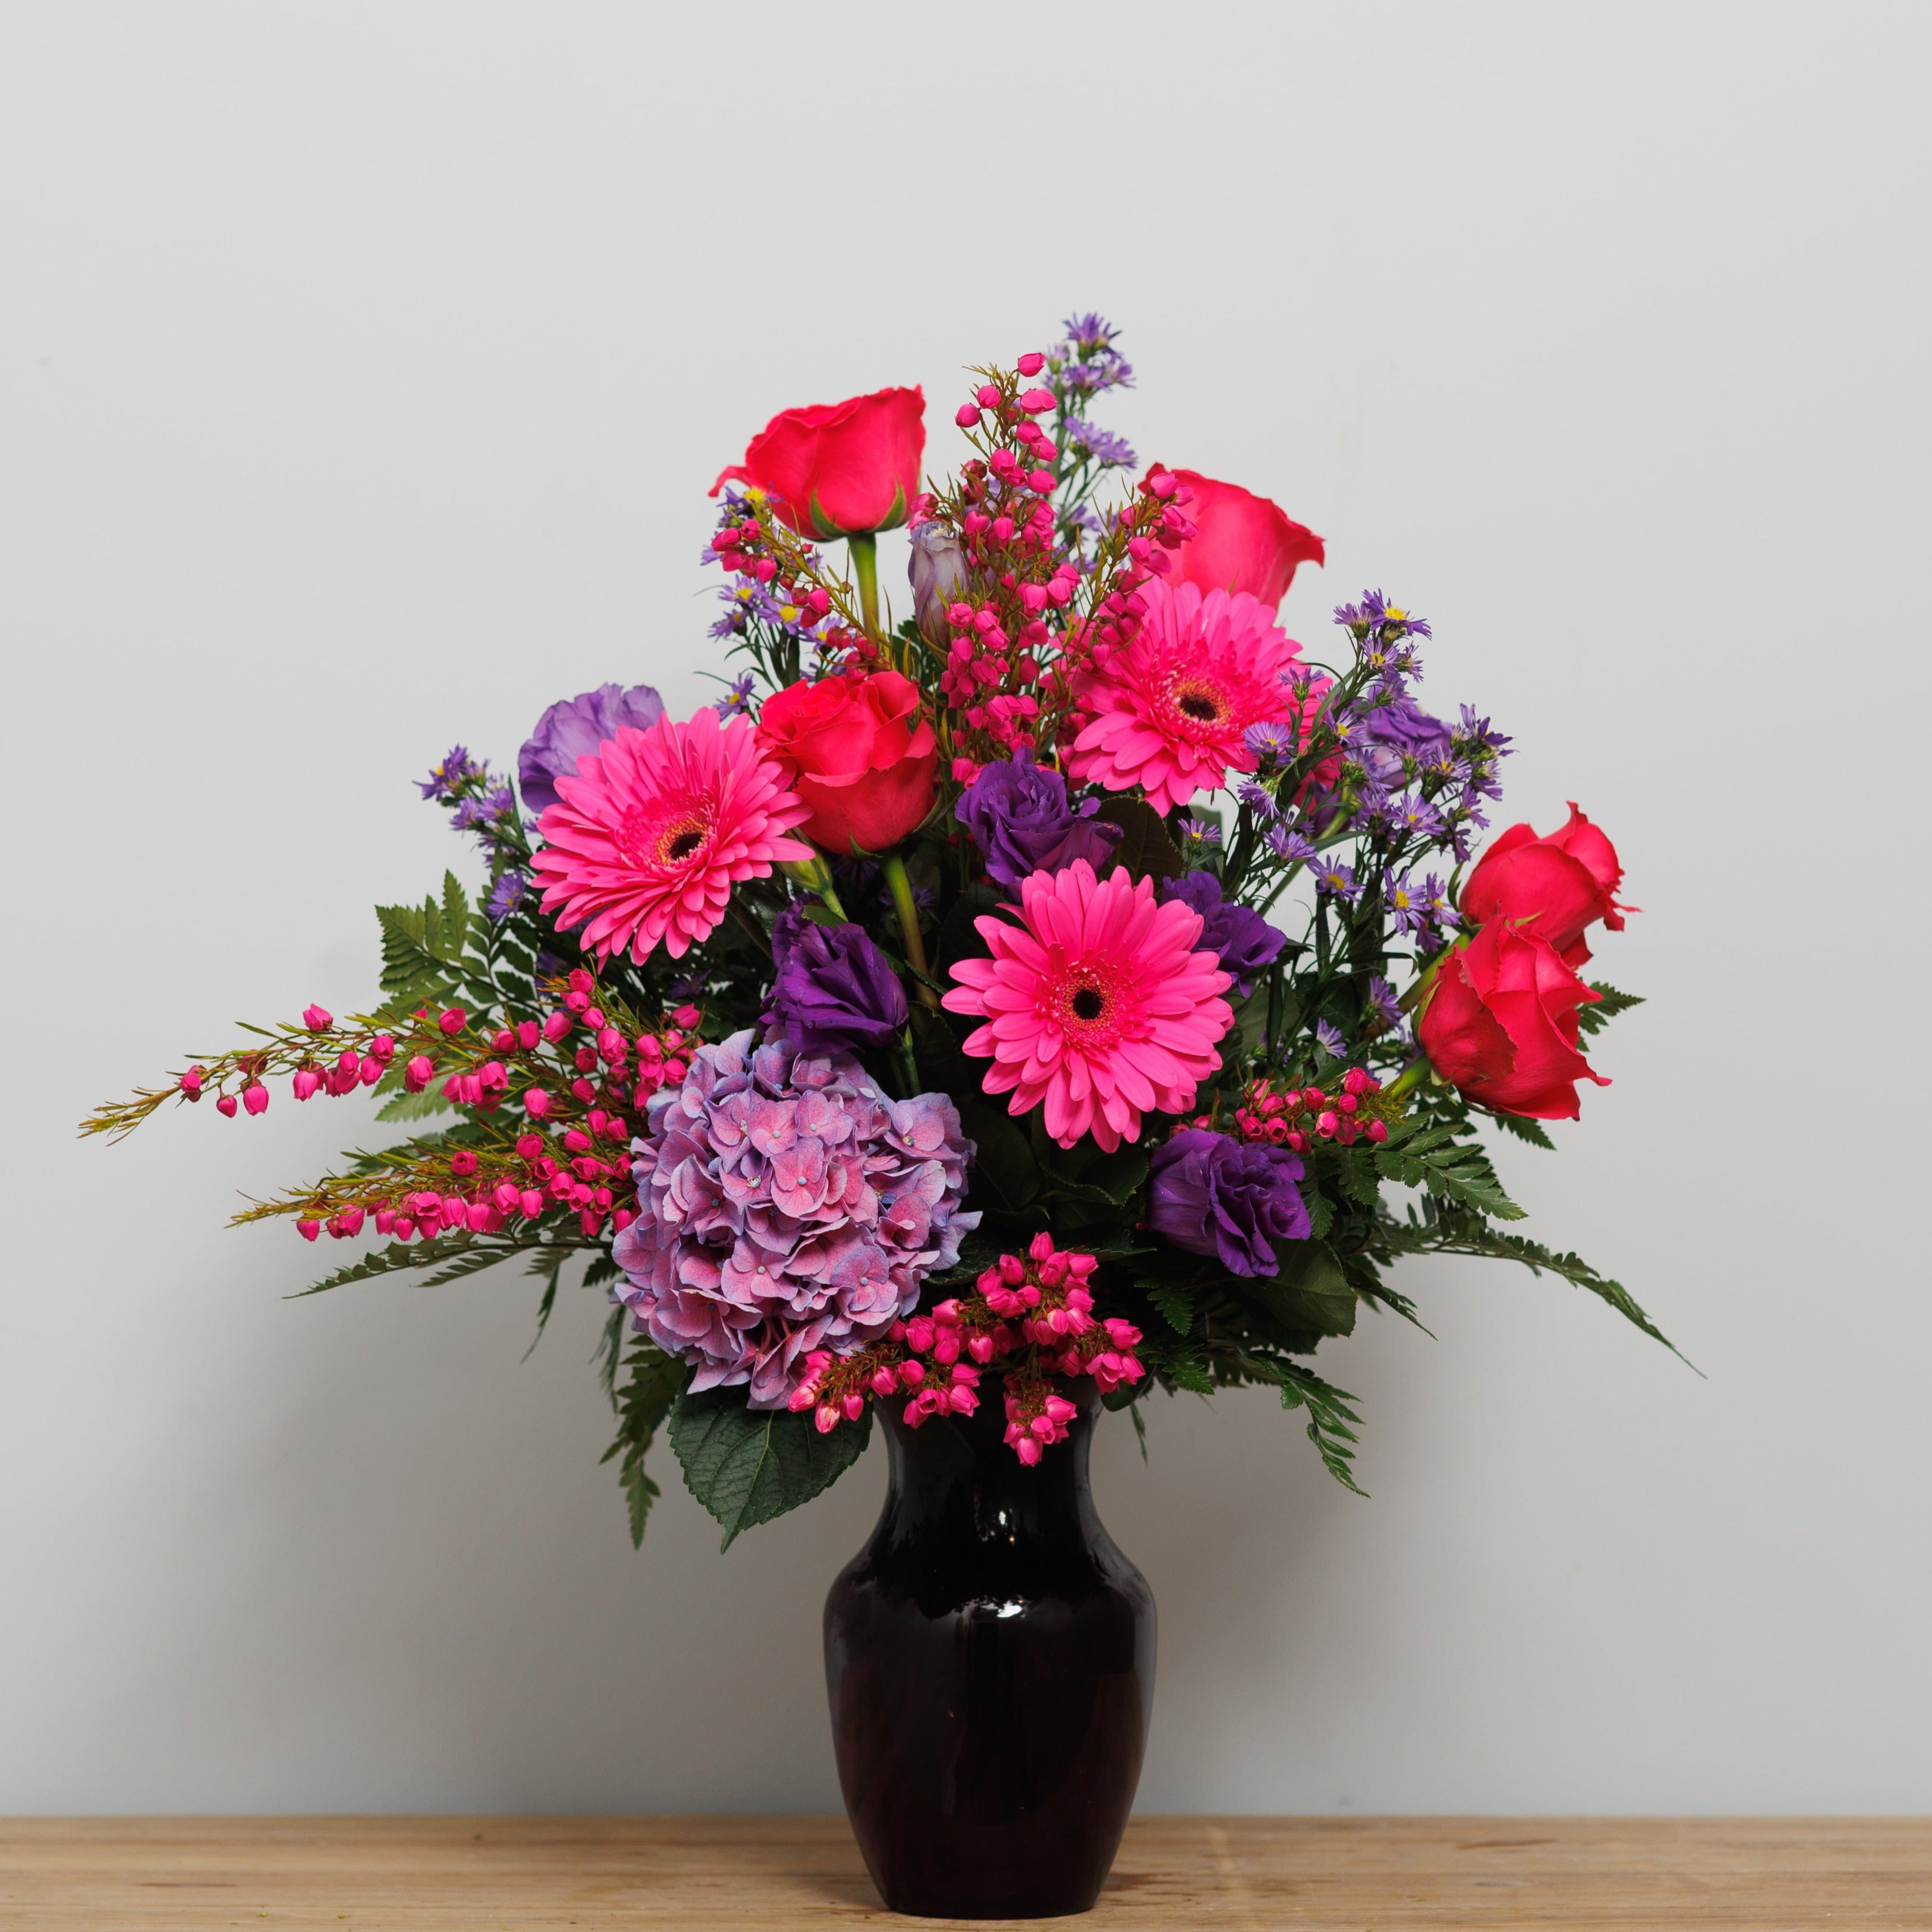 Hot pink and purple flowers in a purple vase.